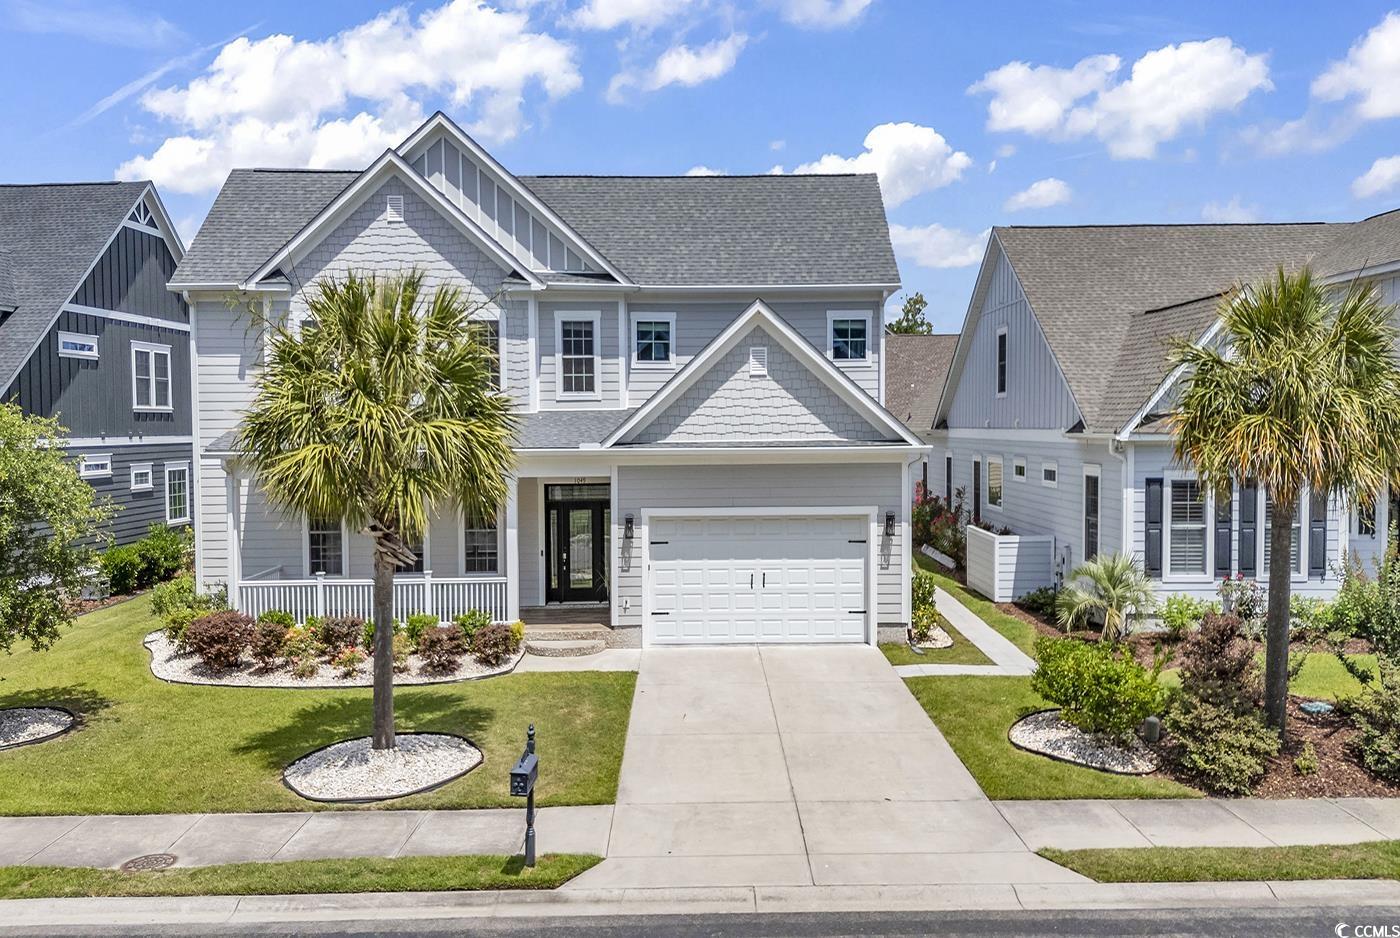 1049 East Isle of Palms Ave. Myrtle Beach, SC 29579